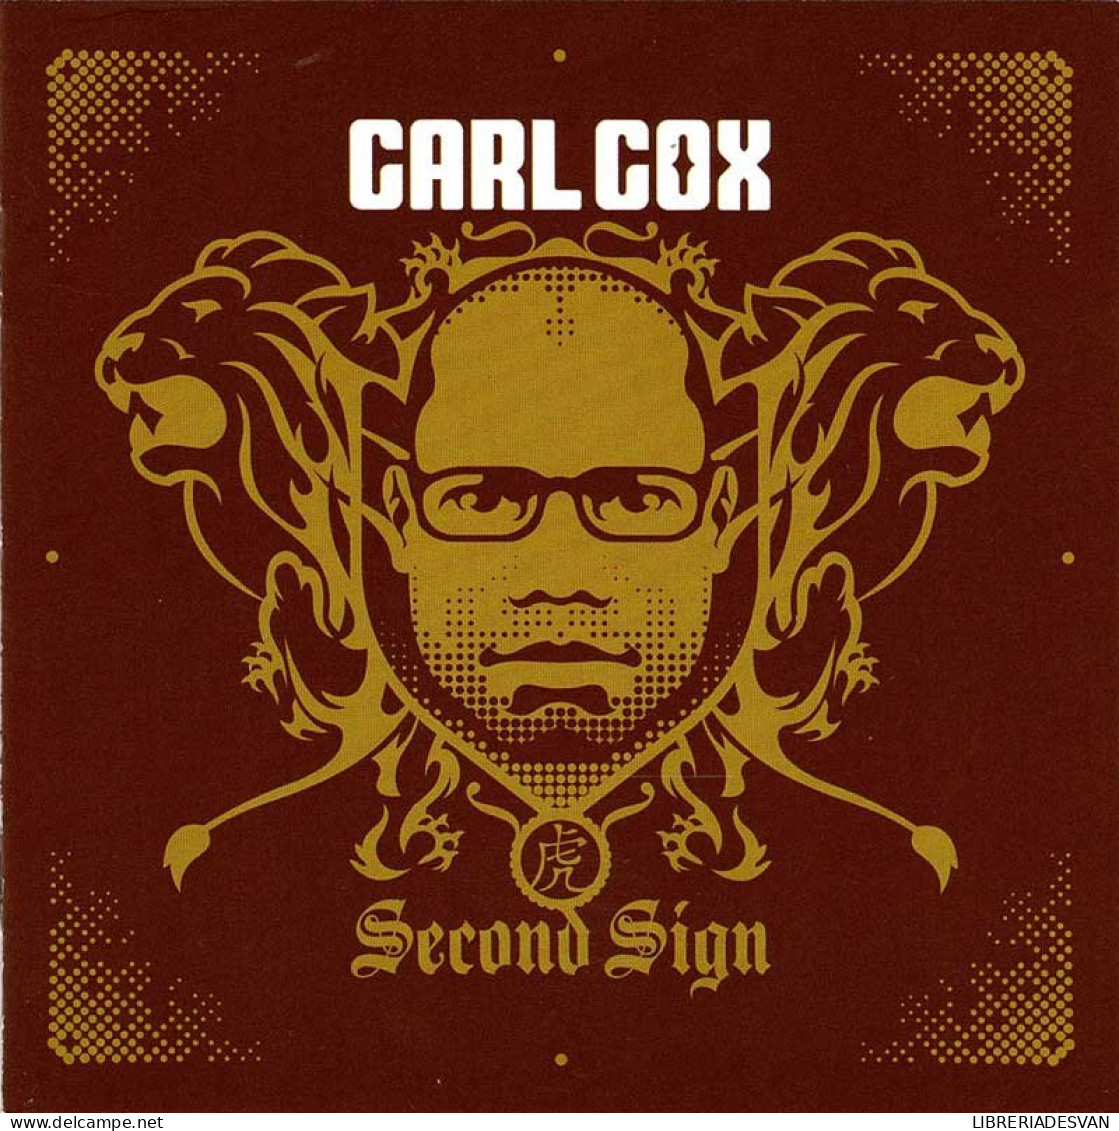 Carl Cox - Second Sign. CD - Dance, Techno & House